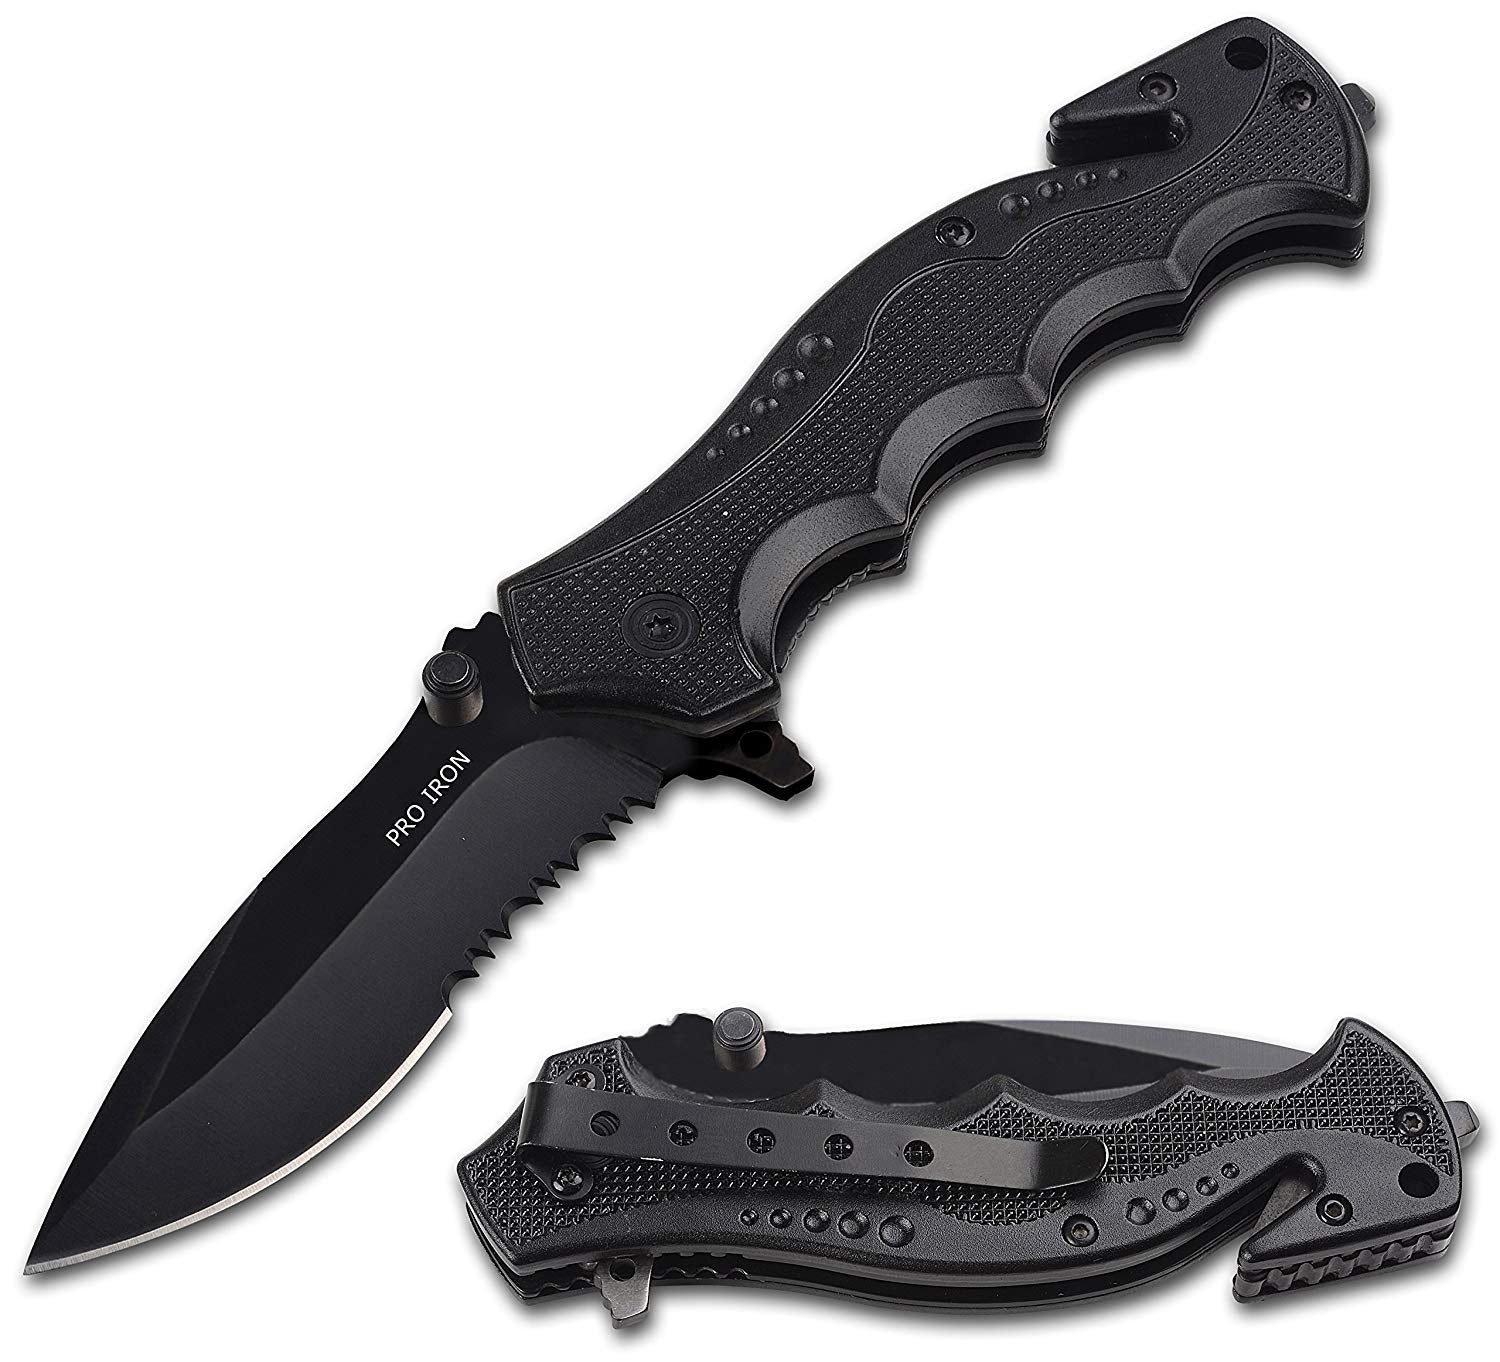 Serrated Edge Outdoor Survival Camping Hunting Knife - 2 Knives - Telk